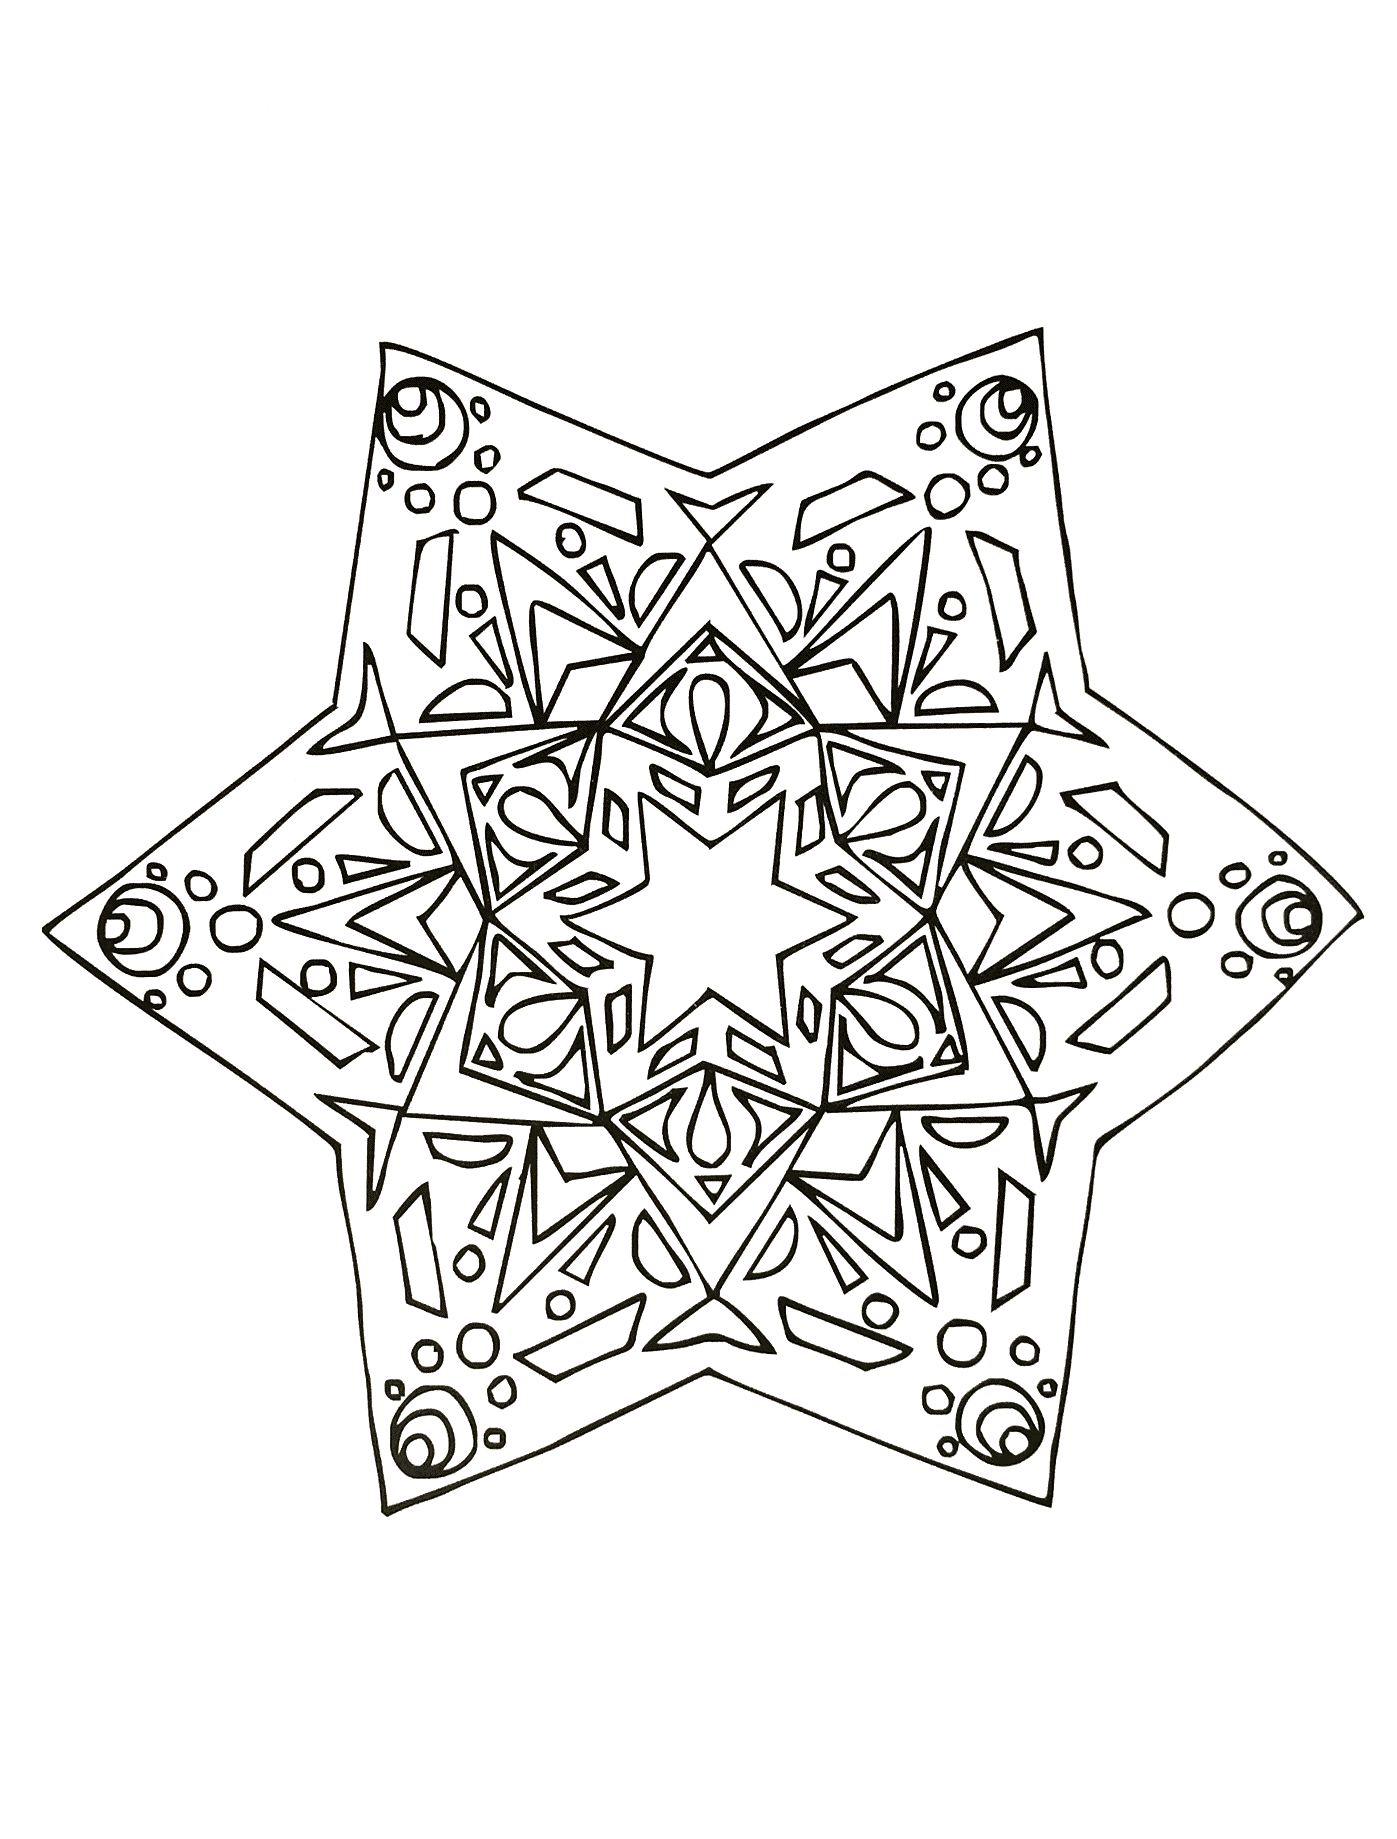 If you are ready to spend some minutes of relaxation, get ready to color this complex Mandala forming a cute star ... You can use many colors if you wish. You must clear your mind and allow yourself to forget all your worries and responsibilities.